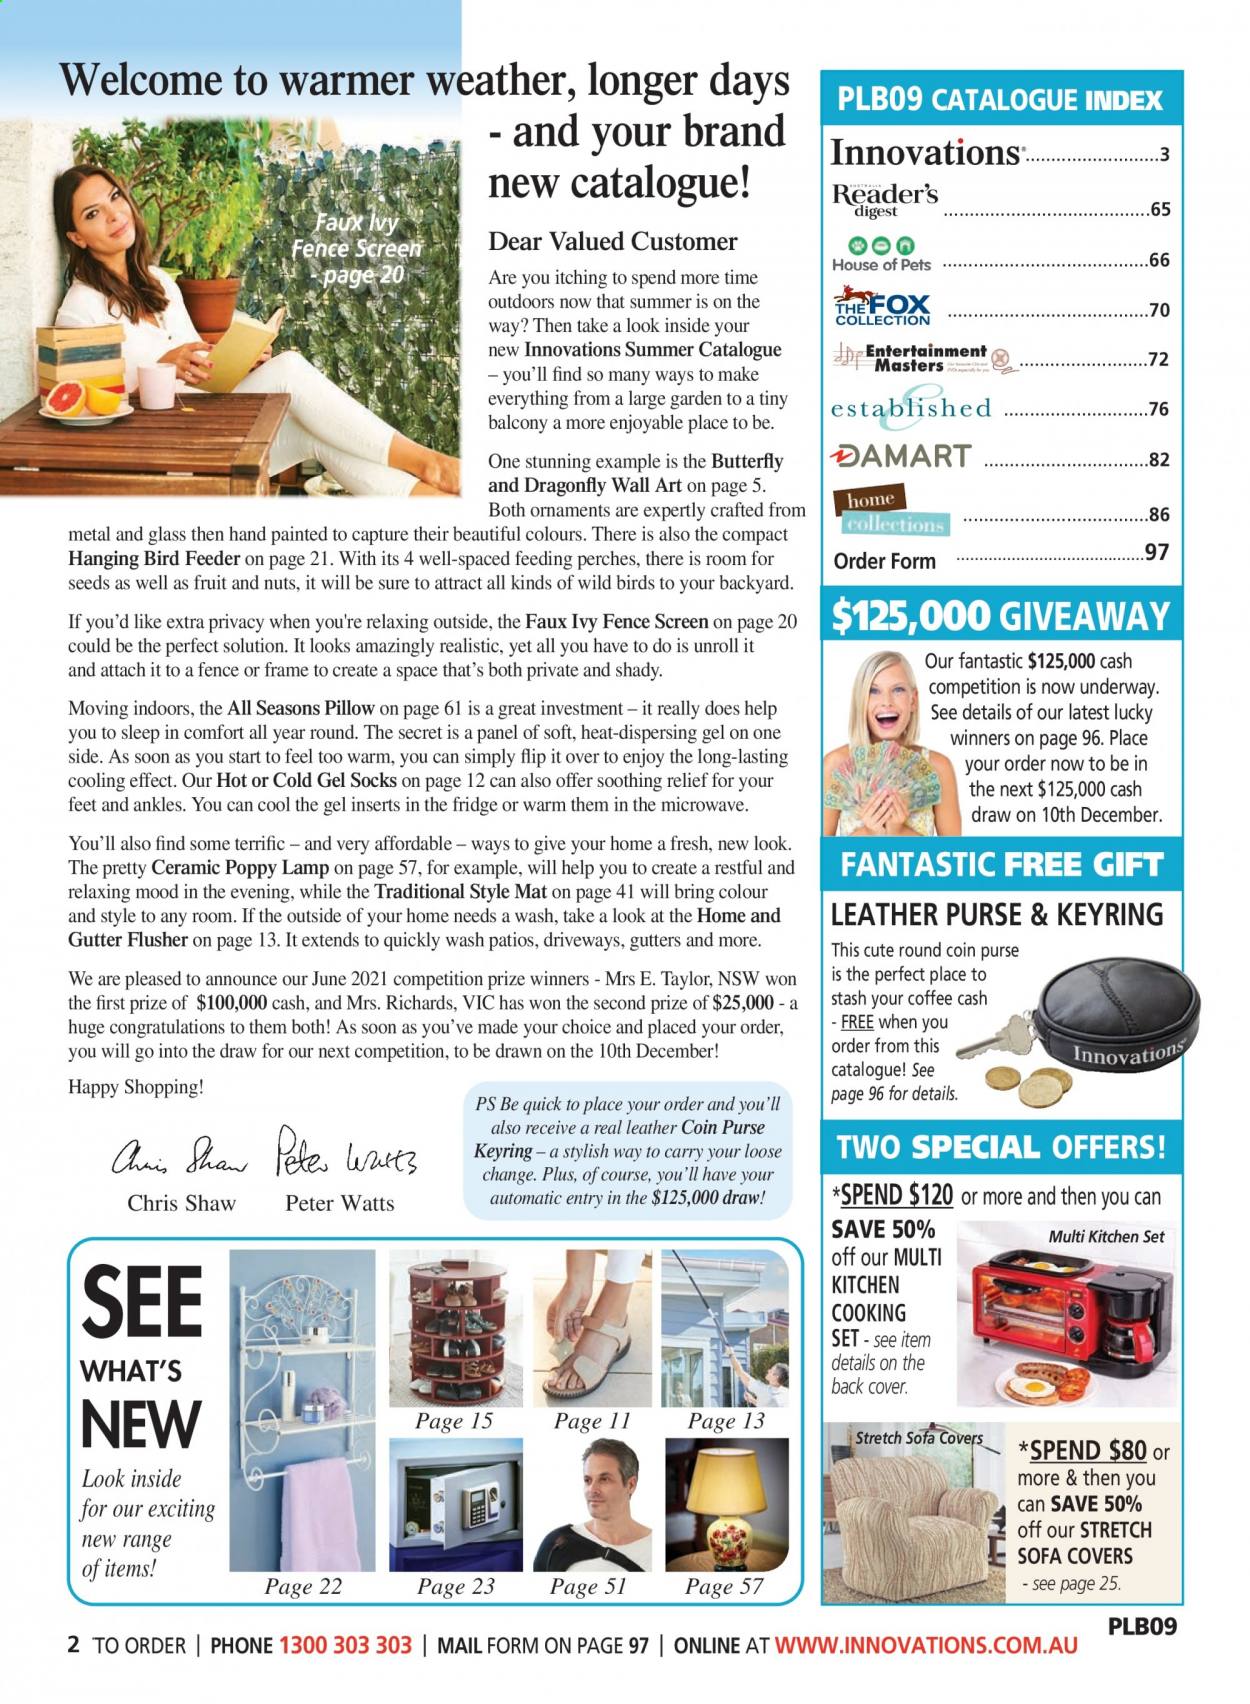 thumbnail - Innovations Catalogue - Sales products - cookware set, pillow, bird feeder, socks, lamp. Page 2.